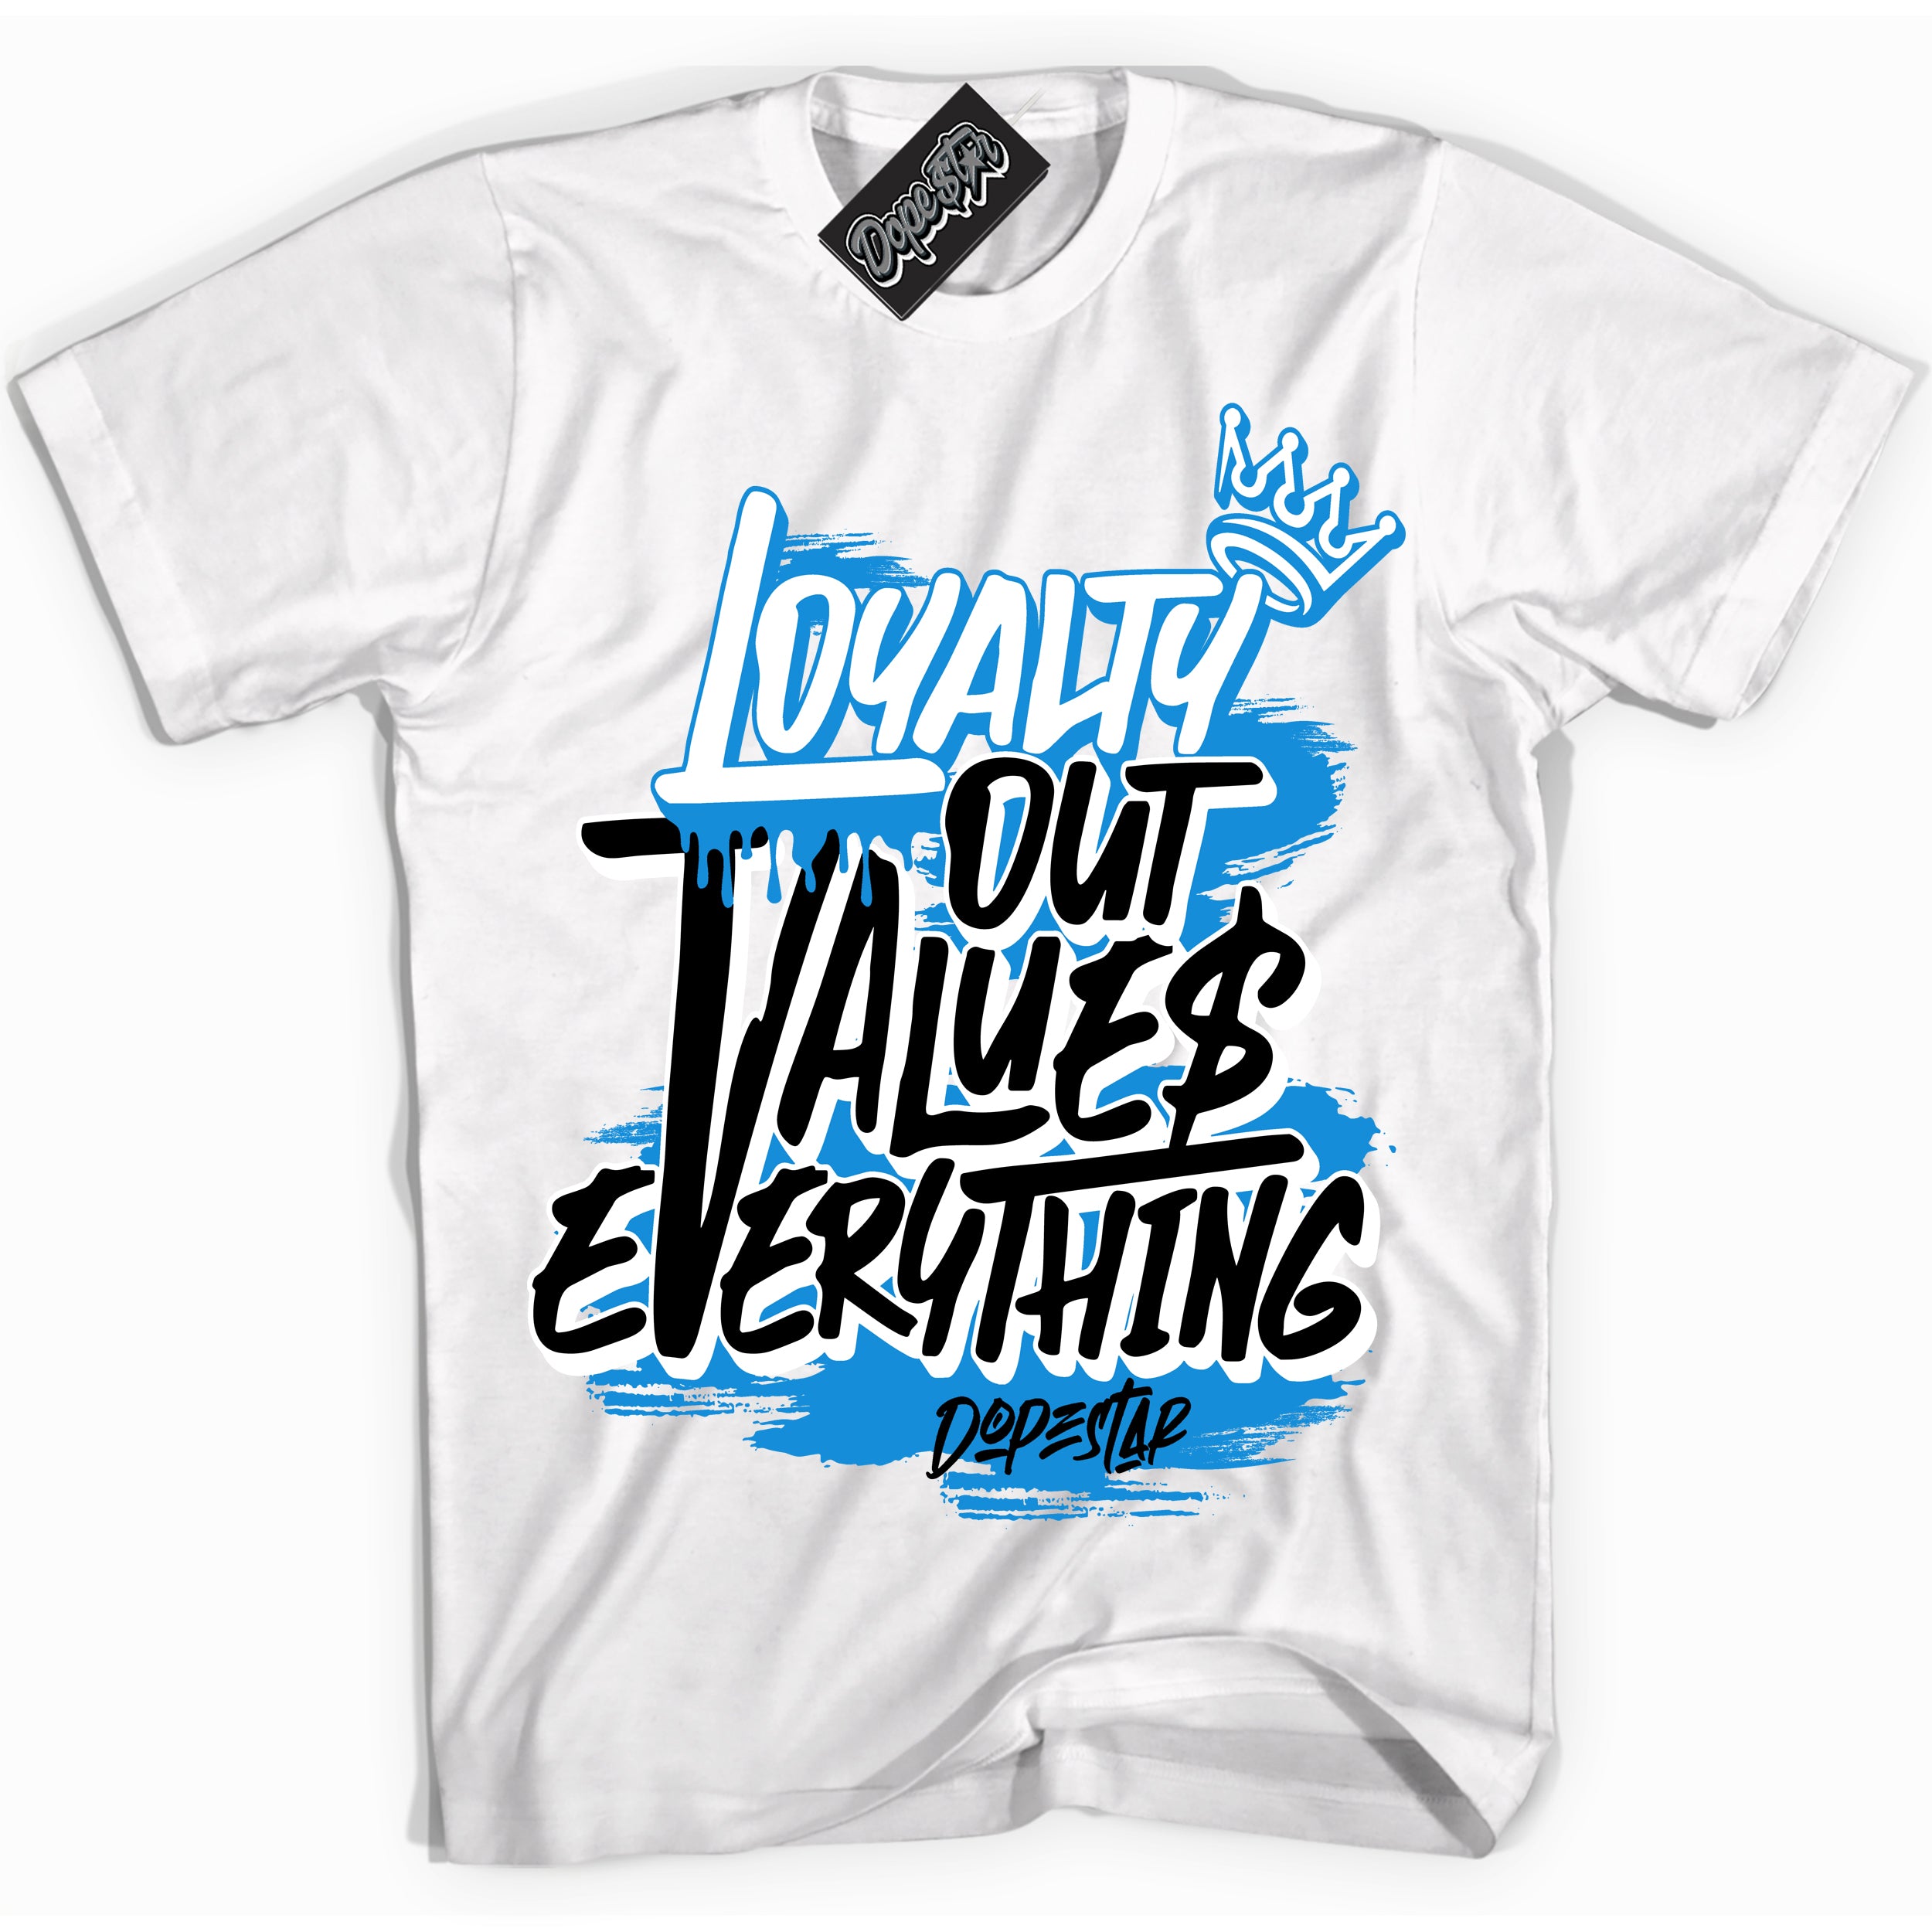 Cool White Shirt with “ Loyalty Out Values Everything” design that perfectly matches Powder Blue 9s Sneakers.